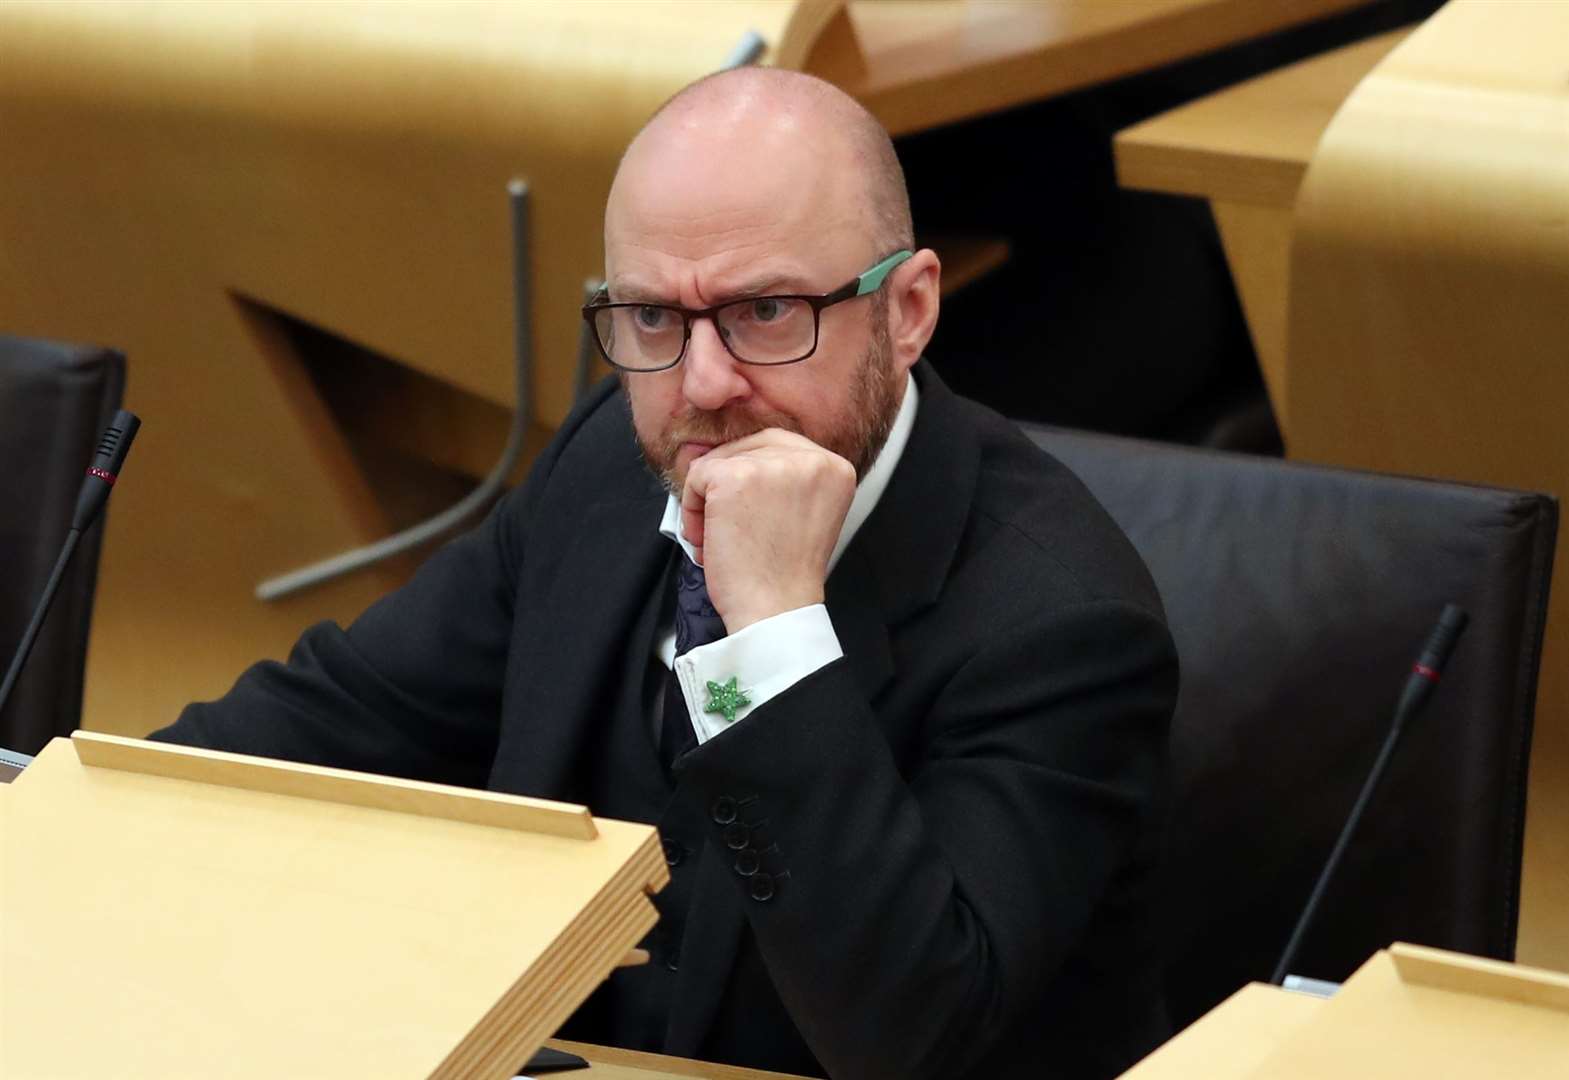 Scottish Greens co-leader Patrick Harvie quizzed Mr Gove on the relationship between the UK and Scottish Governments (Jane Barlow/PA)